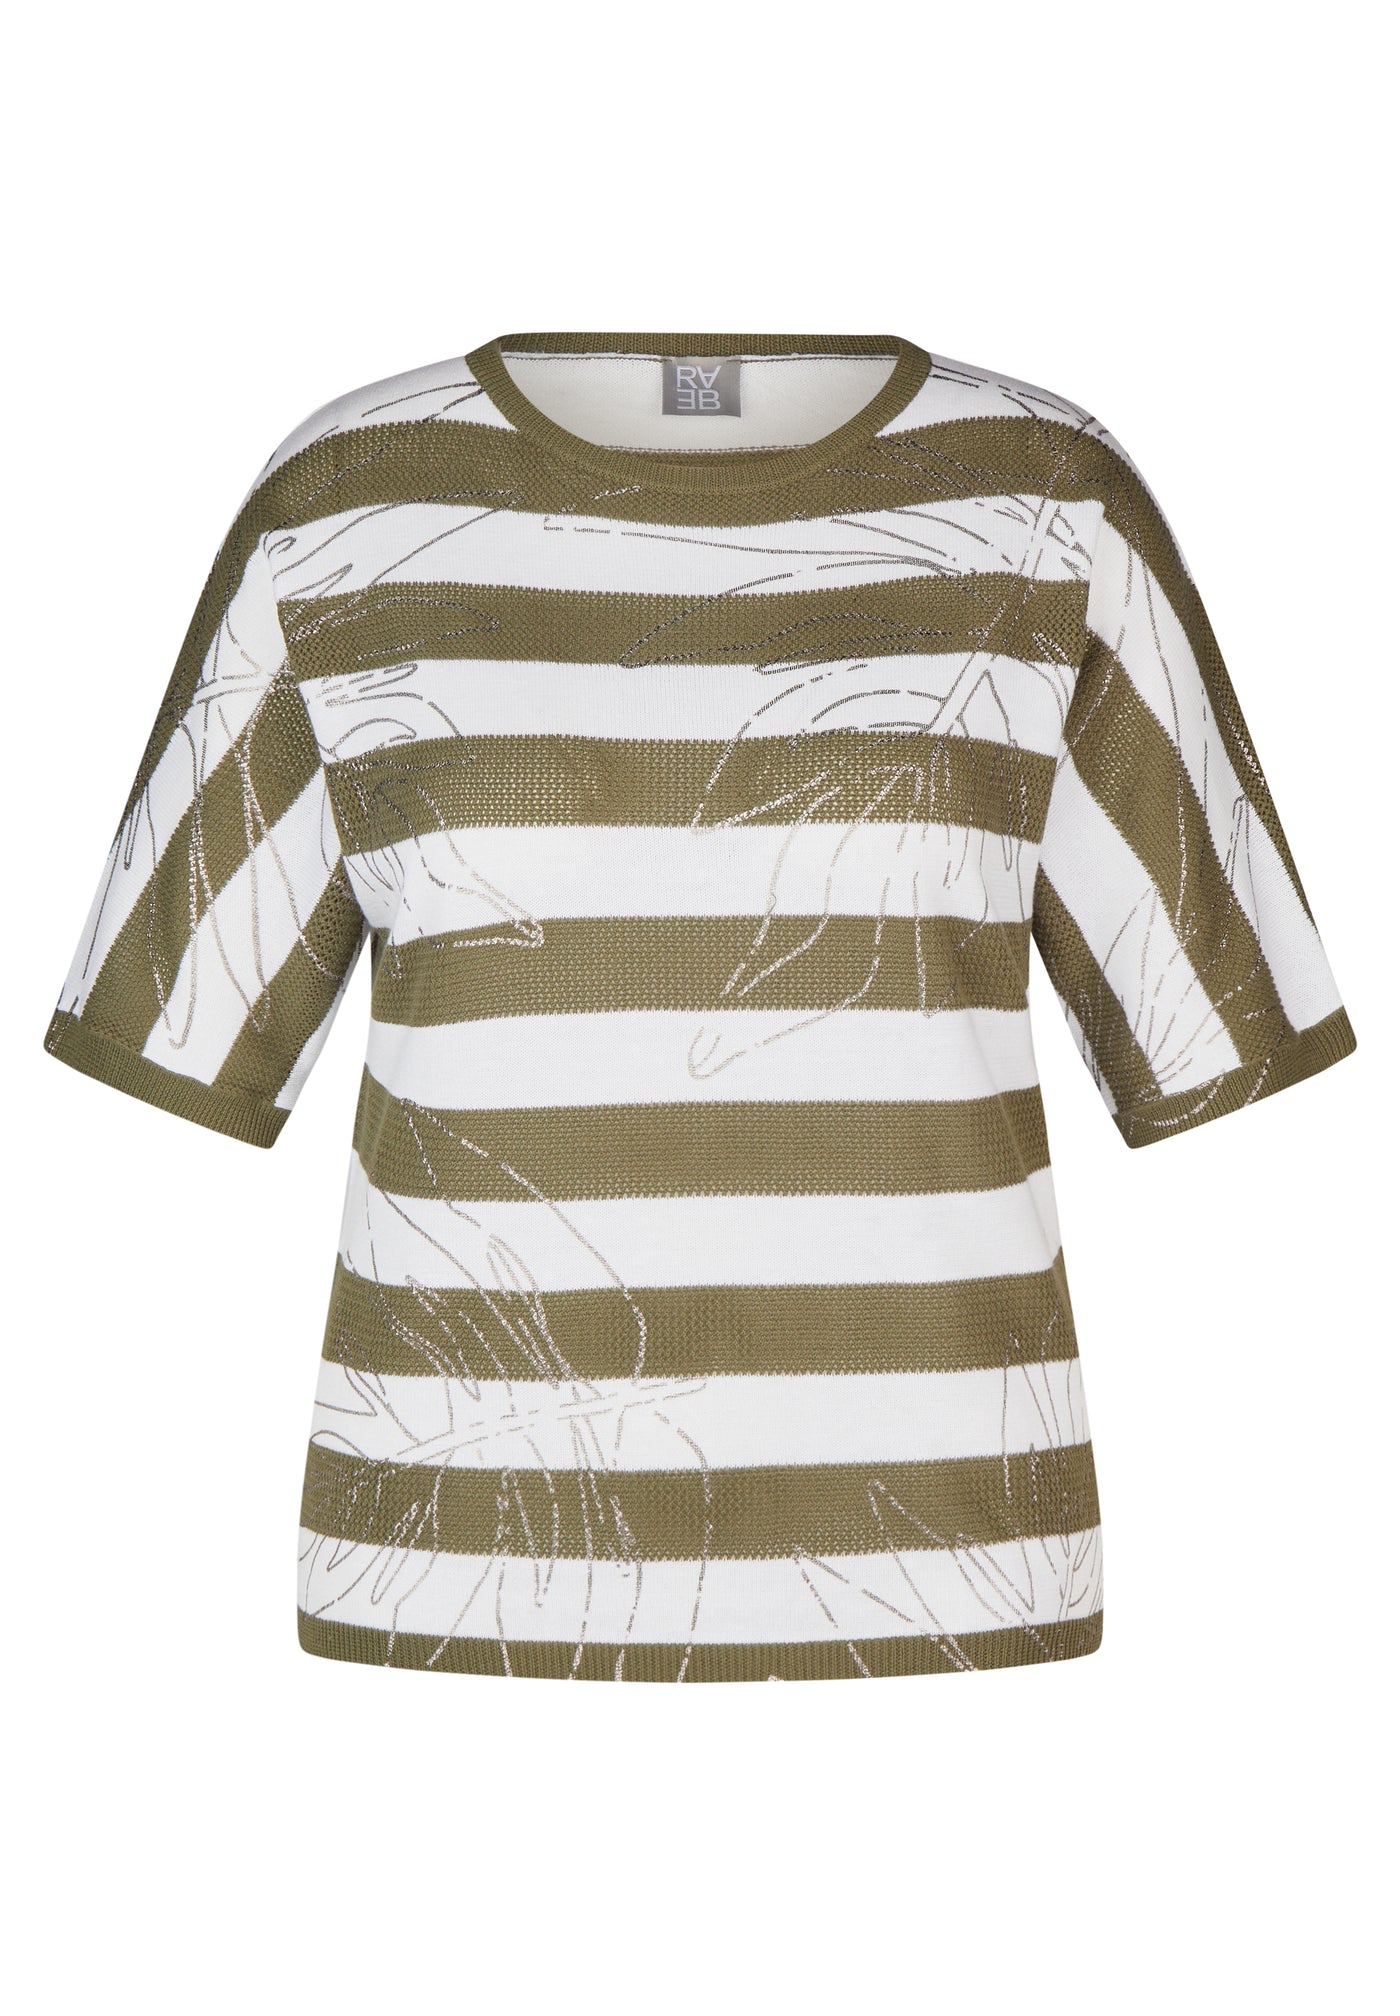 Green & White Striped Jumper With 3/4 Sleeves & Silver Leaf Print Detailing